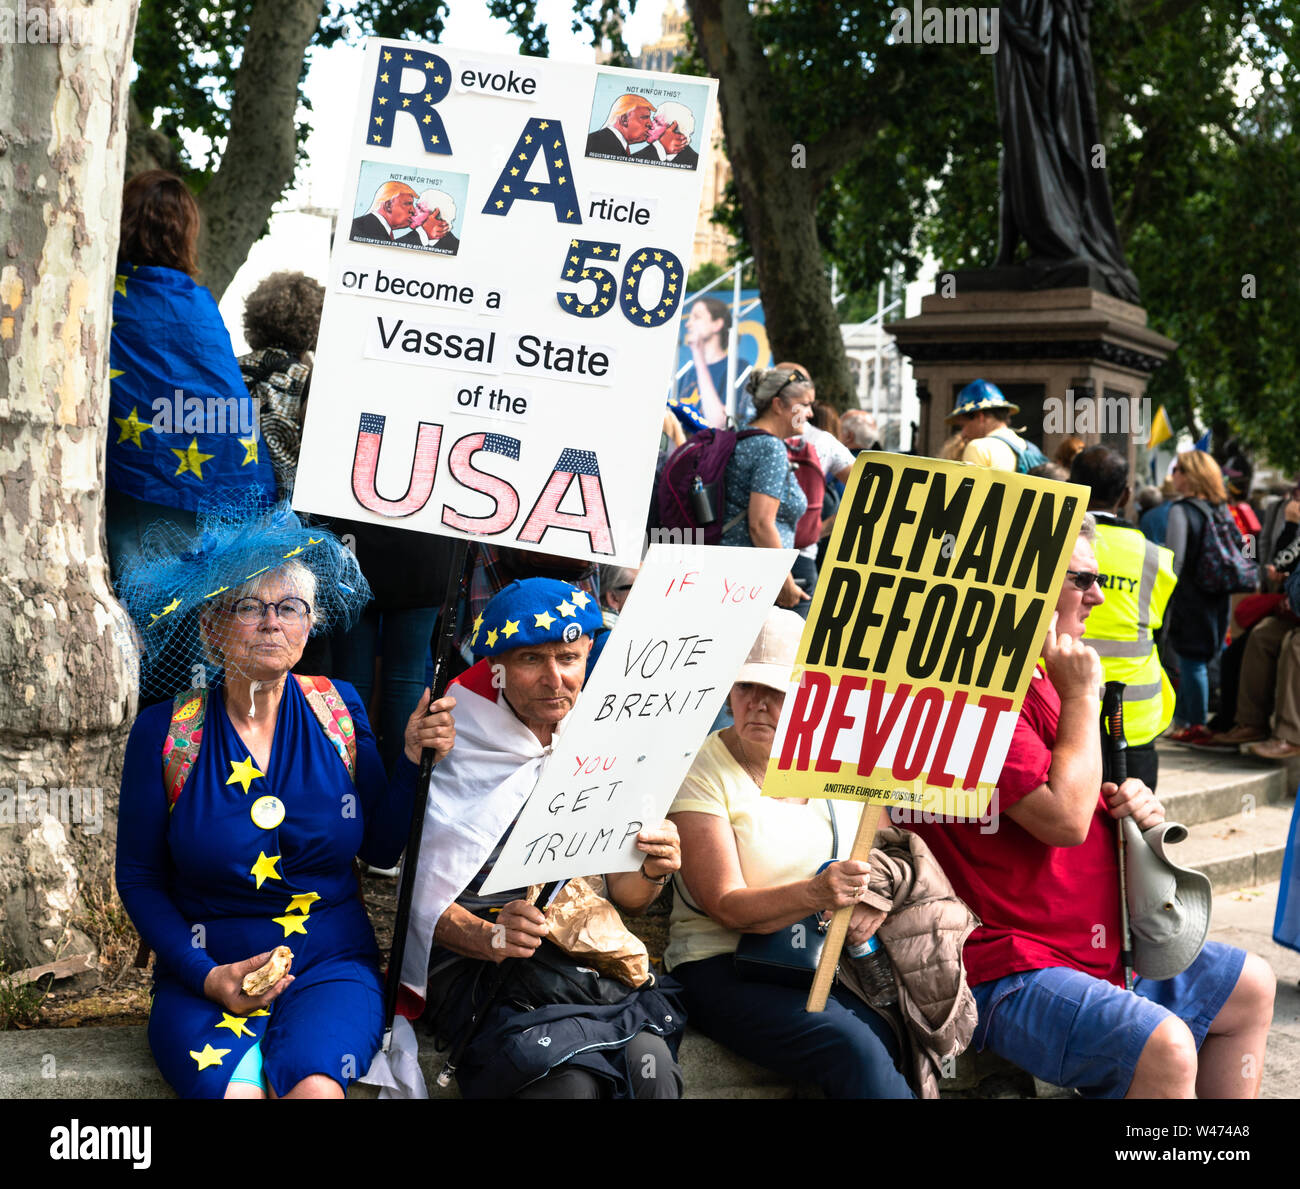 London, UK. July 20th 2019: Anti Brexit protesters gather in Parliament Square following a march through London. It has been estimated that 1 million people attended from all regions in the country Credit: Bridget Catterall/Alamy Live News Stock Photo